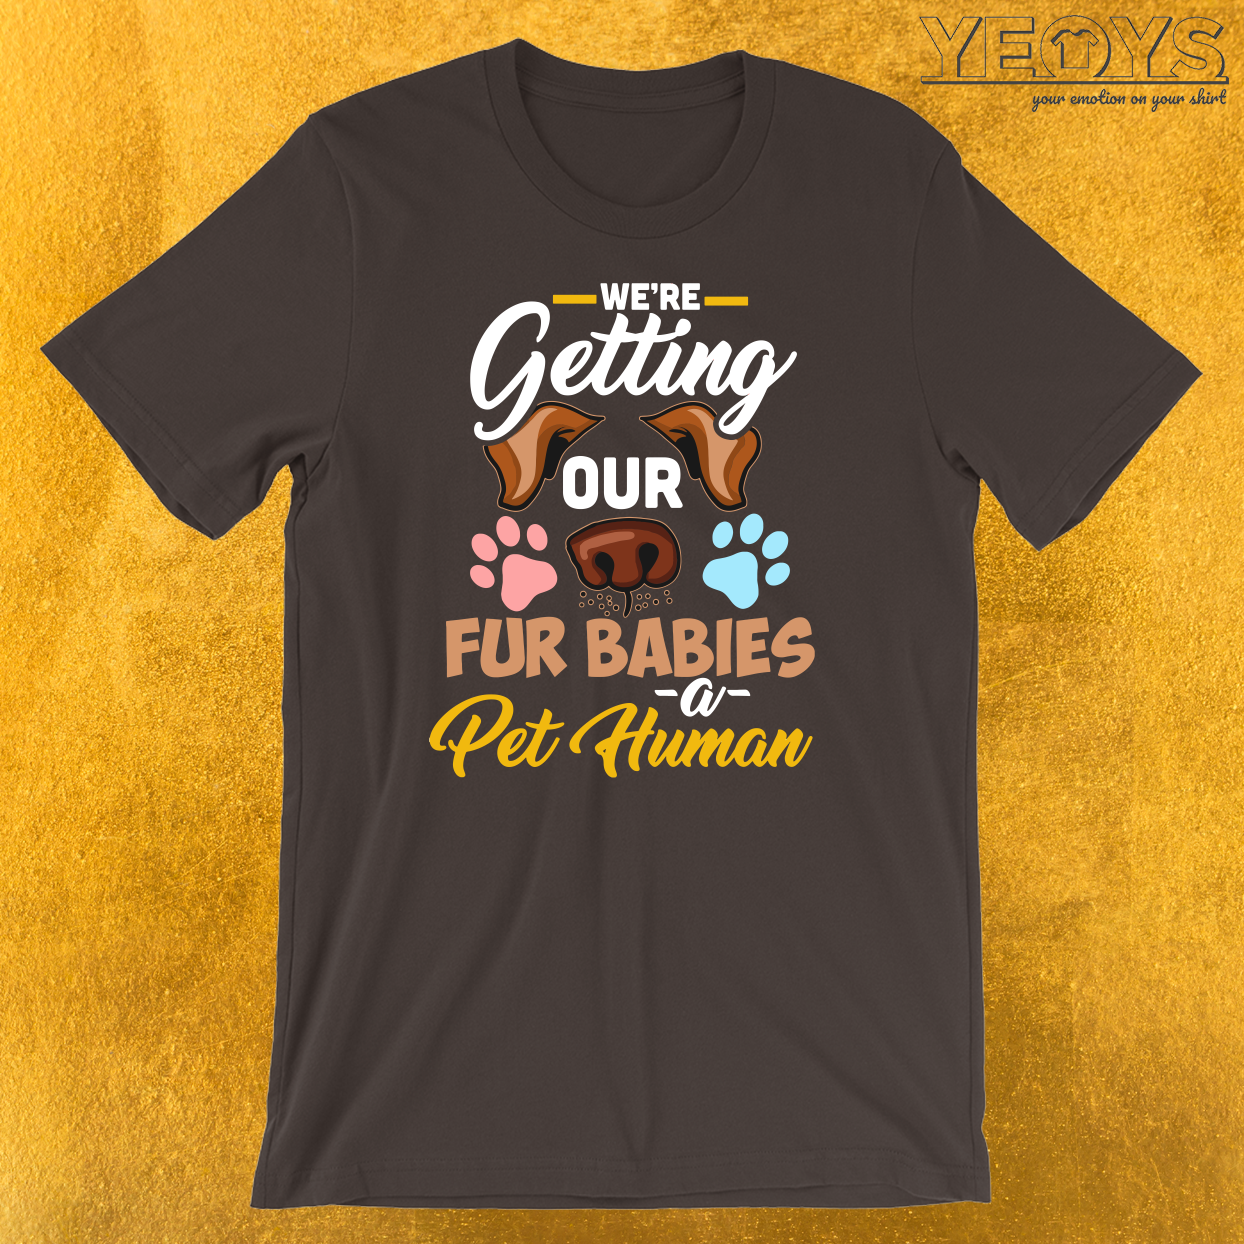 We’re Getting Our Fur Babies A Pet Human T-Shirt